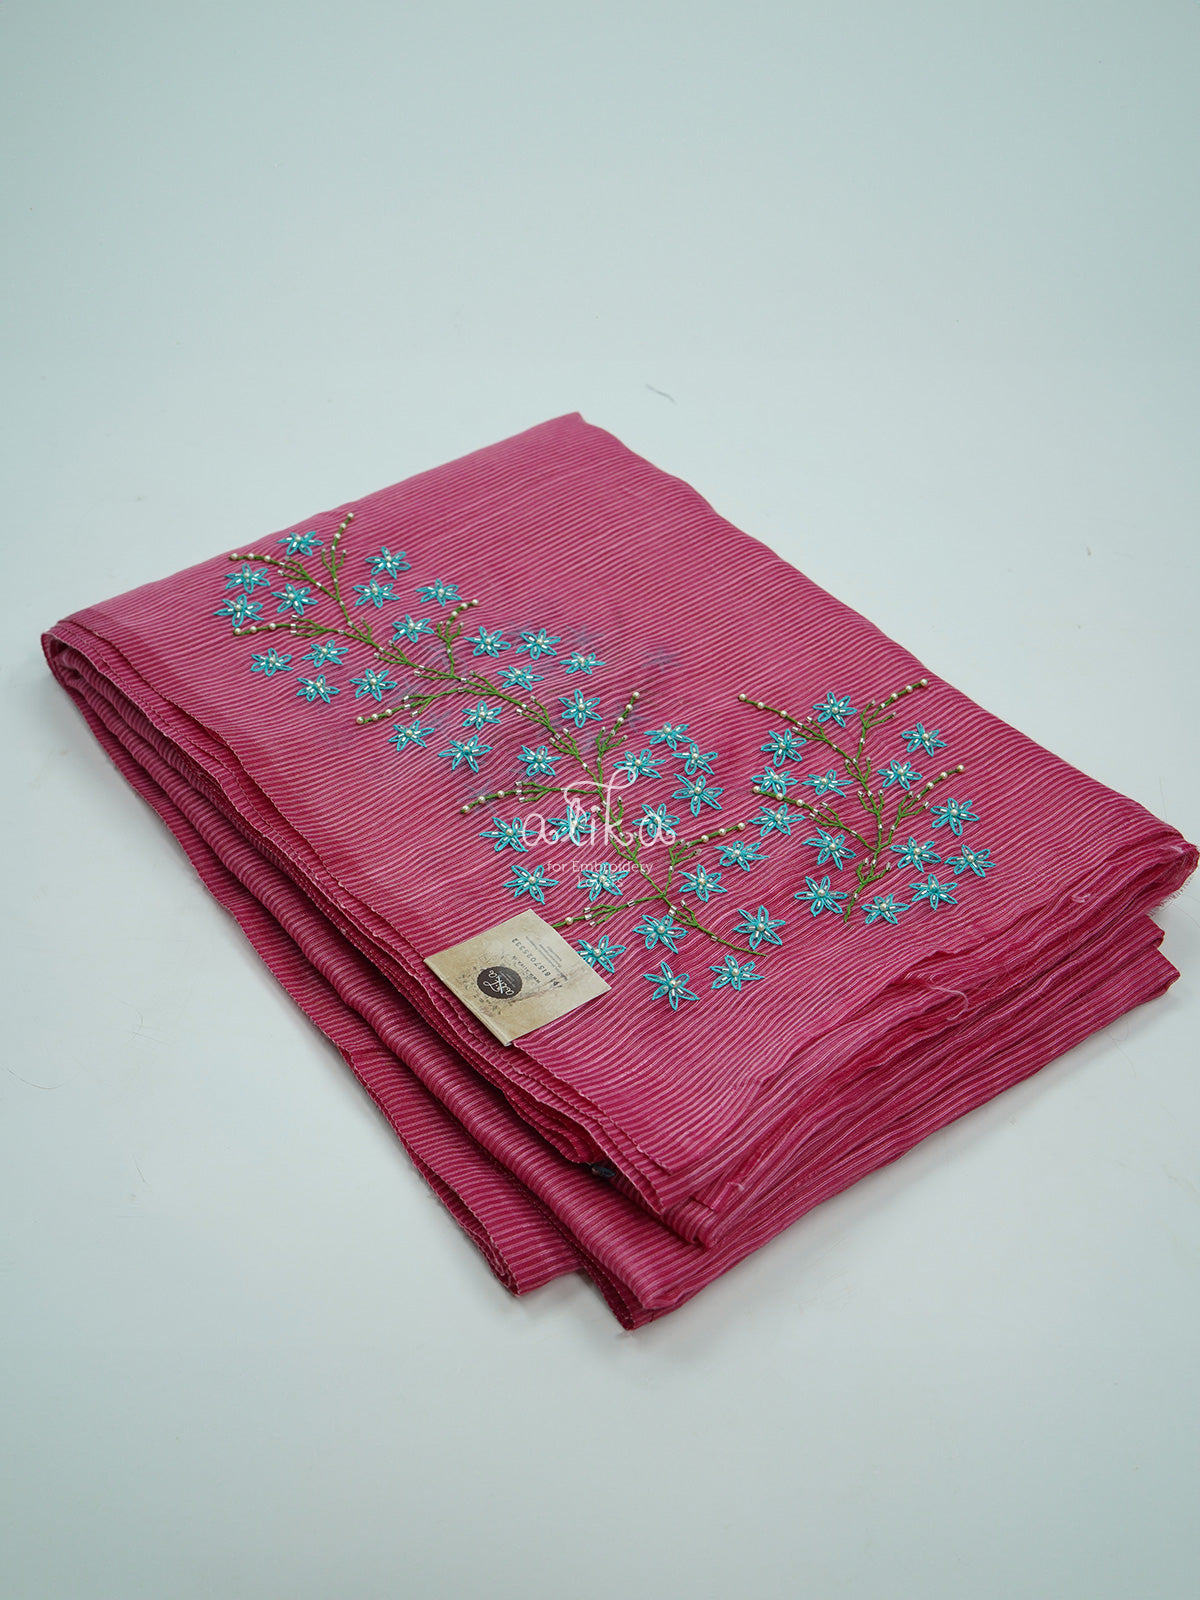 PINK STRIPED KOTA SAREE WITH LAZY DAISY  EMBROIDERY